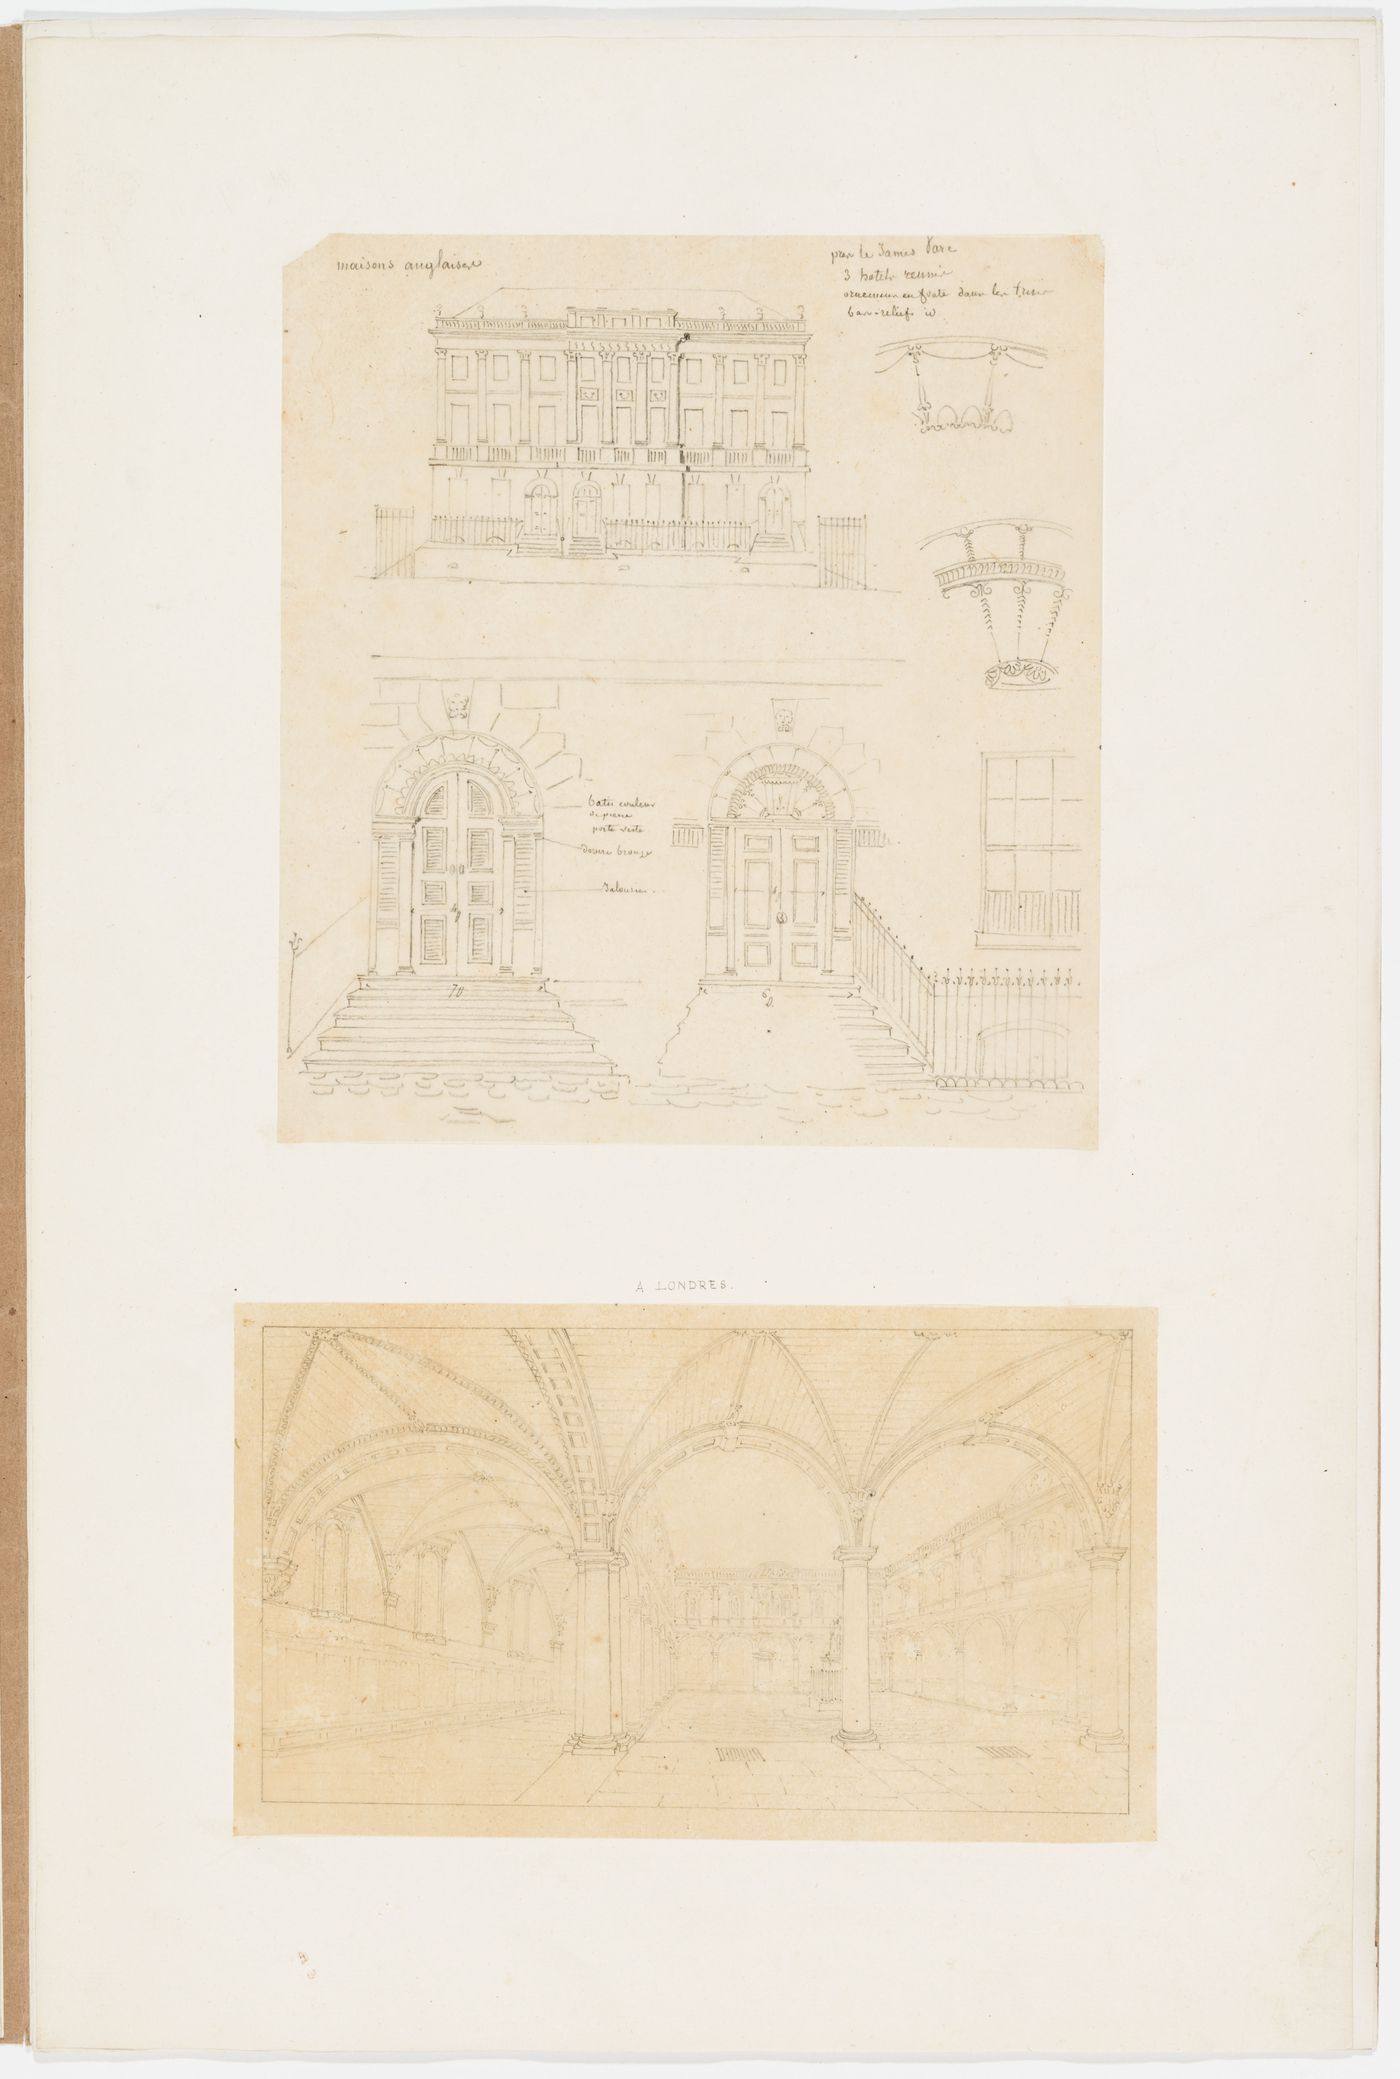 Exterior elevation of a façade from an English house by James Ware, with a partial exterior elevation of two doors and stoops and details of the fanlights; Perspective of a loggia or cloister in London with a sculpture in the central cloister garth